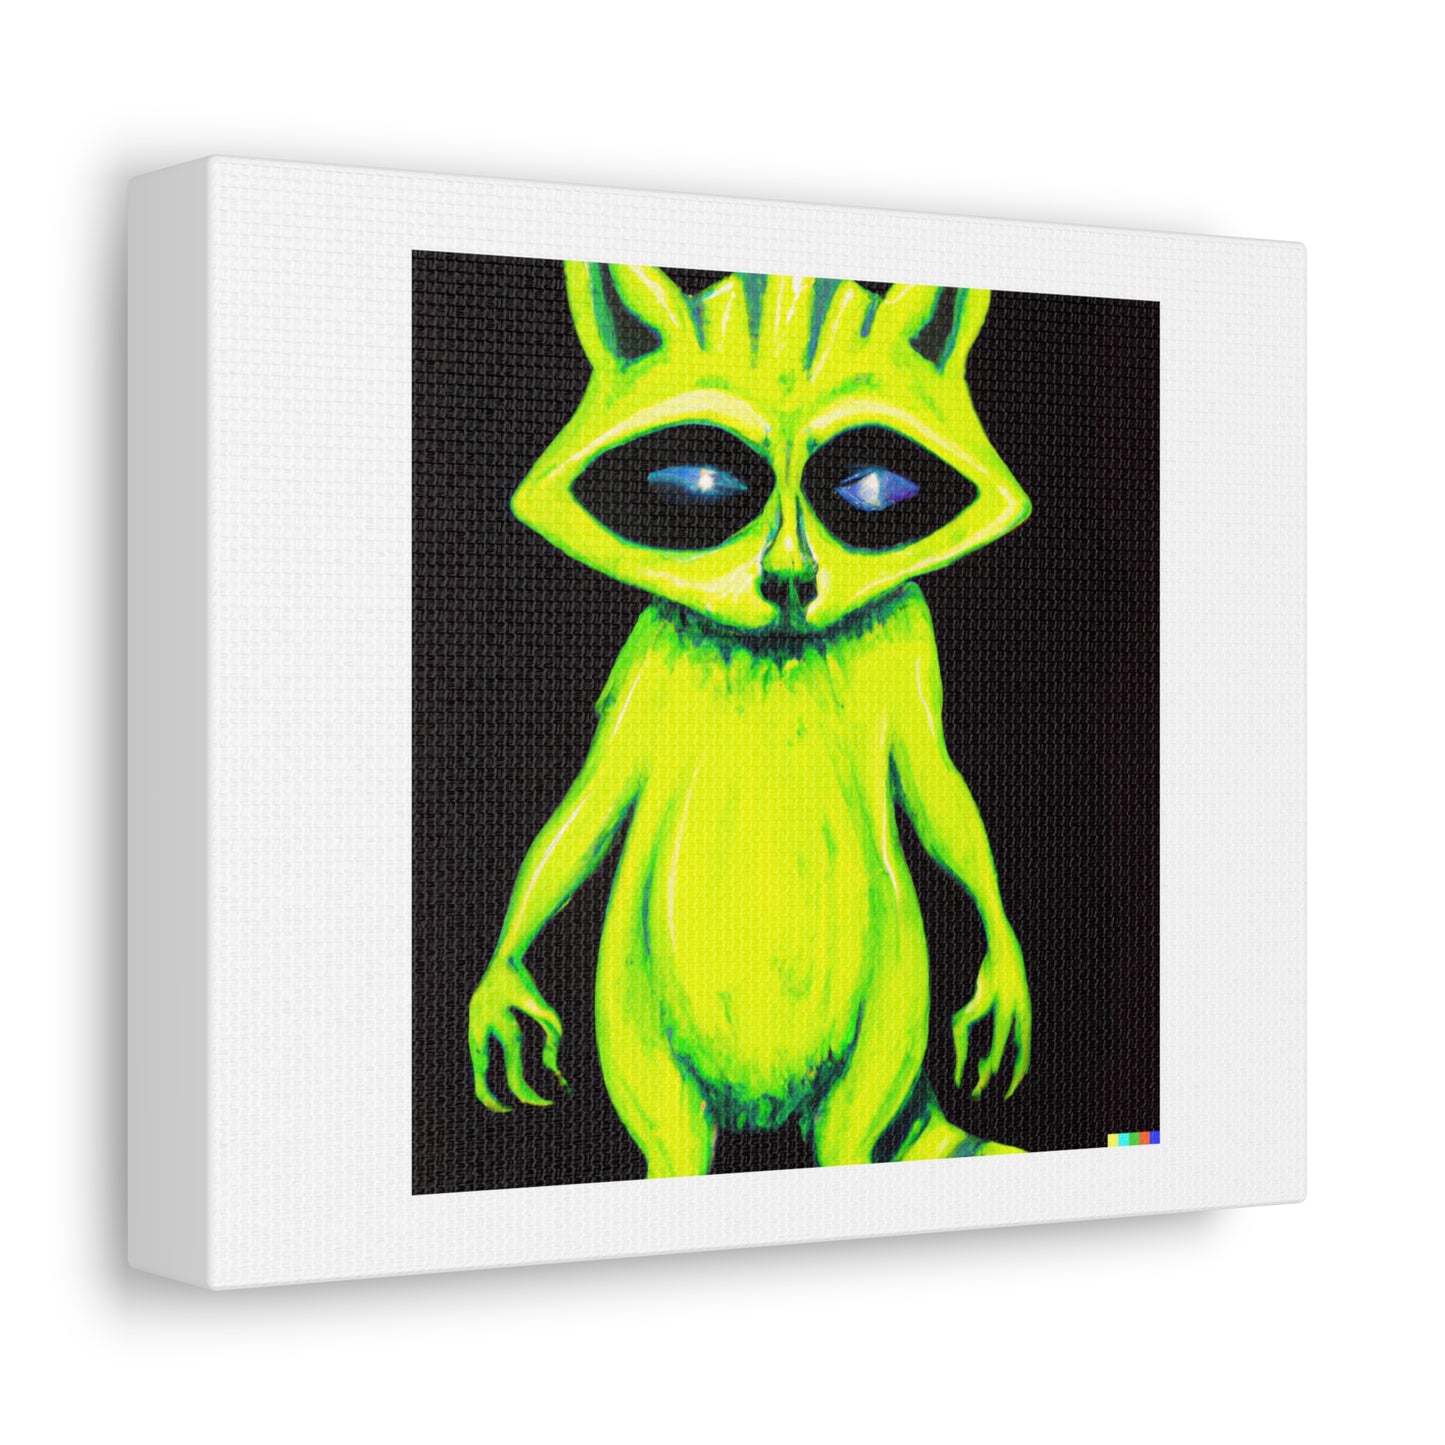 Alien Crossed With a Raccoon Acrylic Painting With Glowing Eyes 'Designed by AI' on Canvas